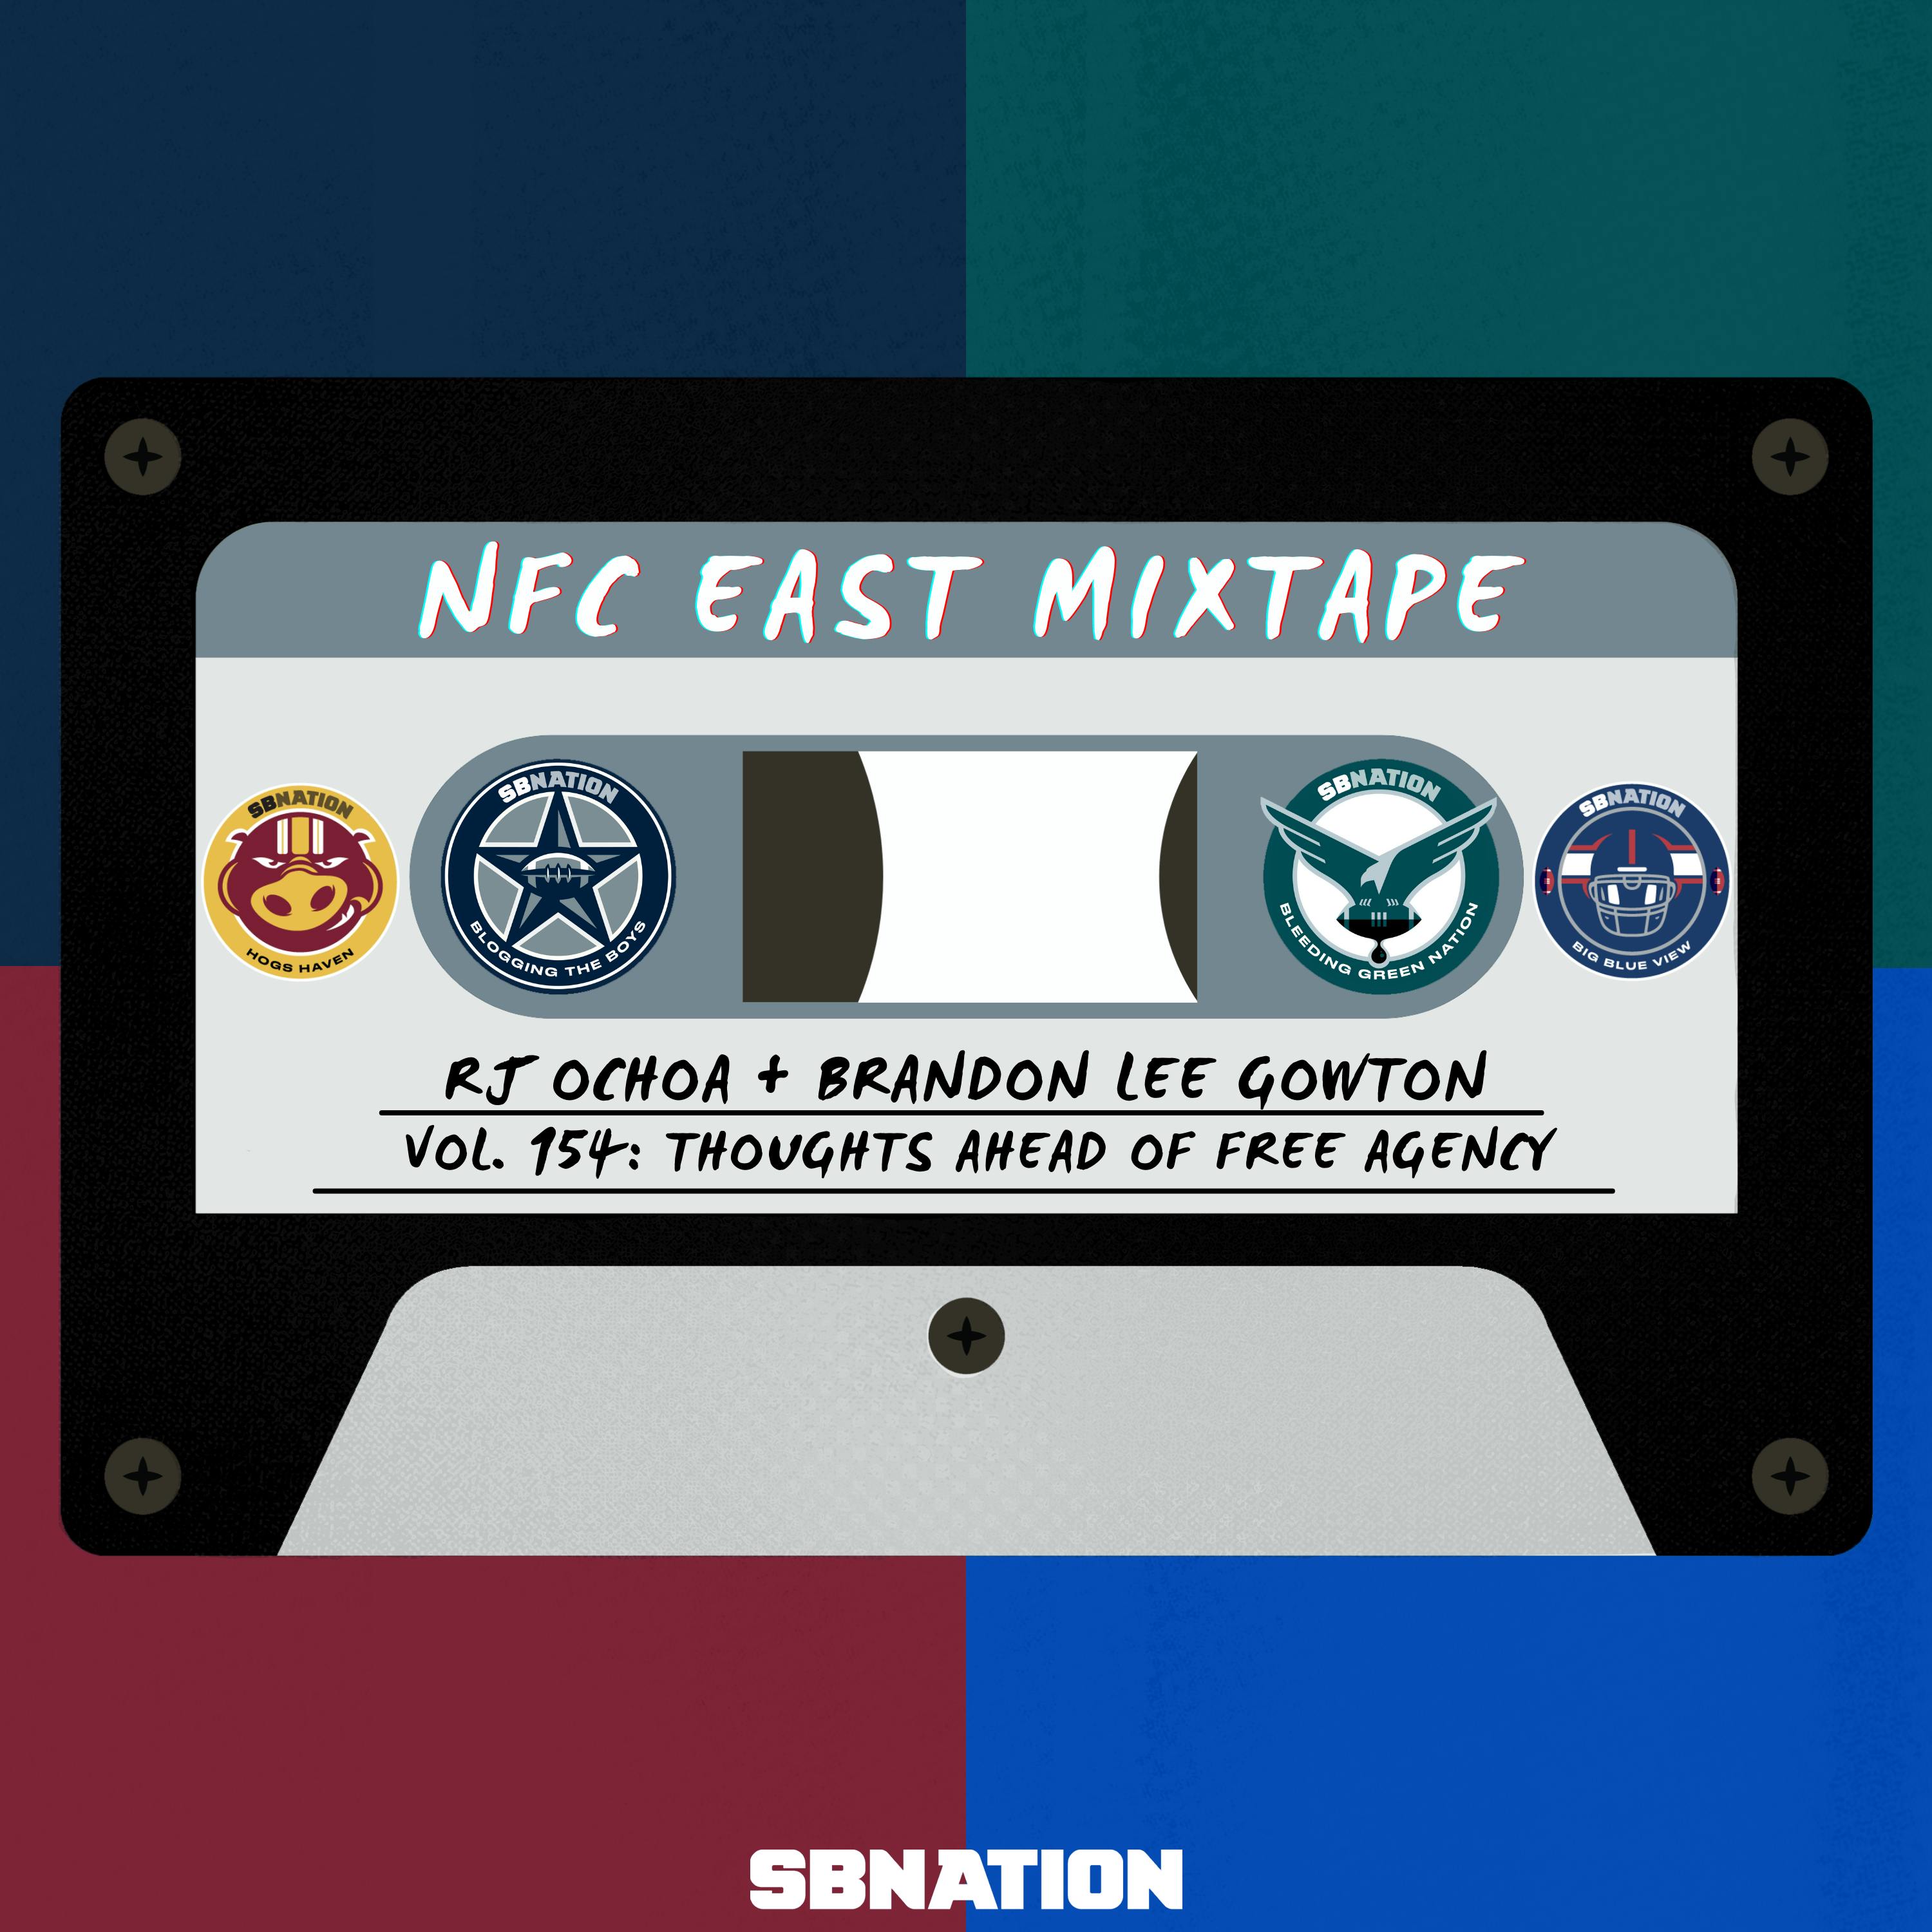 NFC East Mixtape Vol. 154: Thoughts ahead of Free Agency